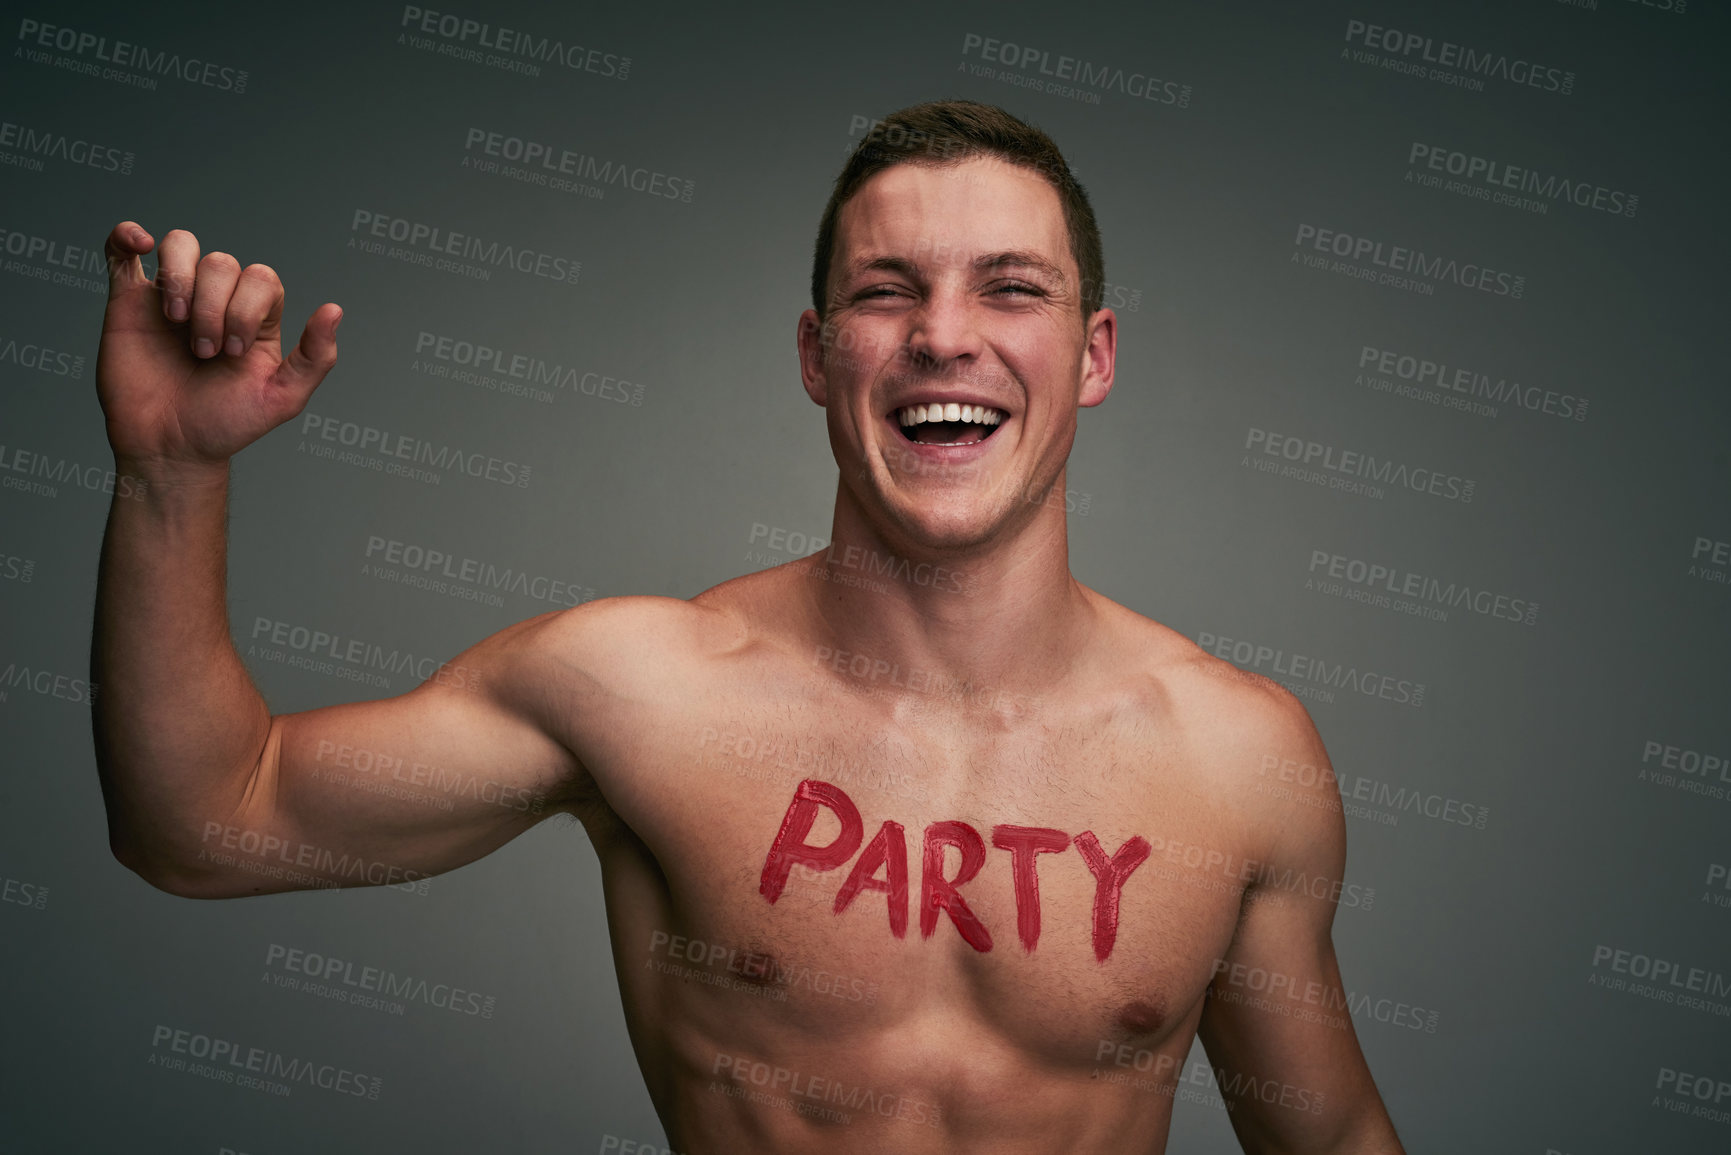 Buy stock photo Studio shot of a cheerful young shirtless man standing and flexing his muscles with the word 